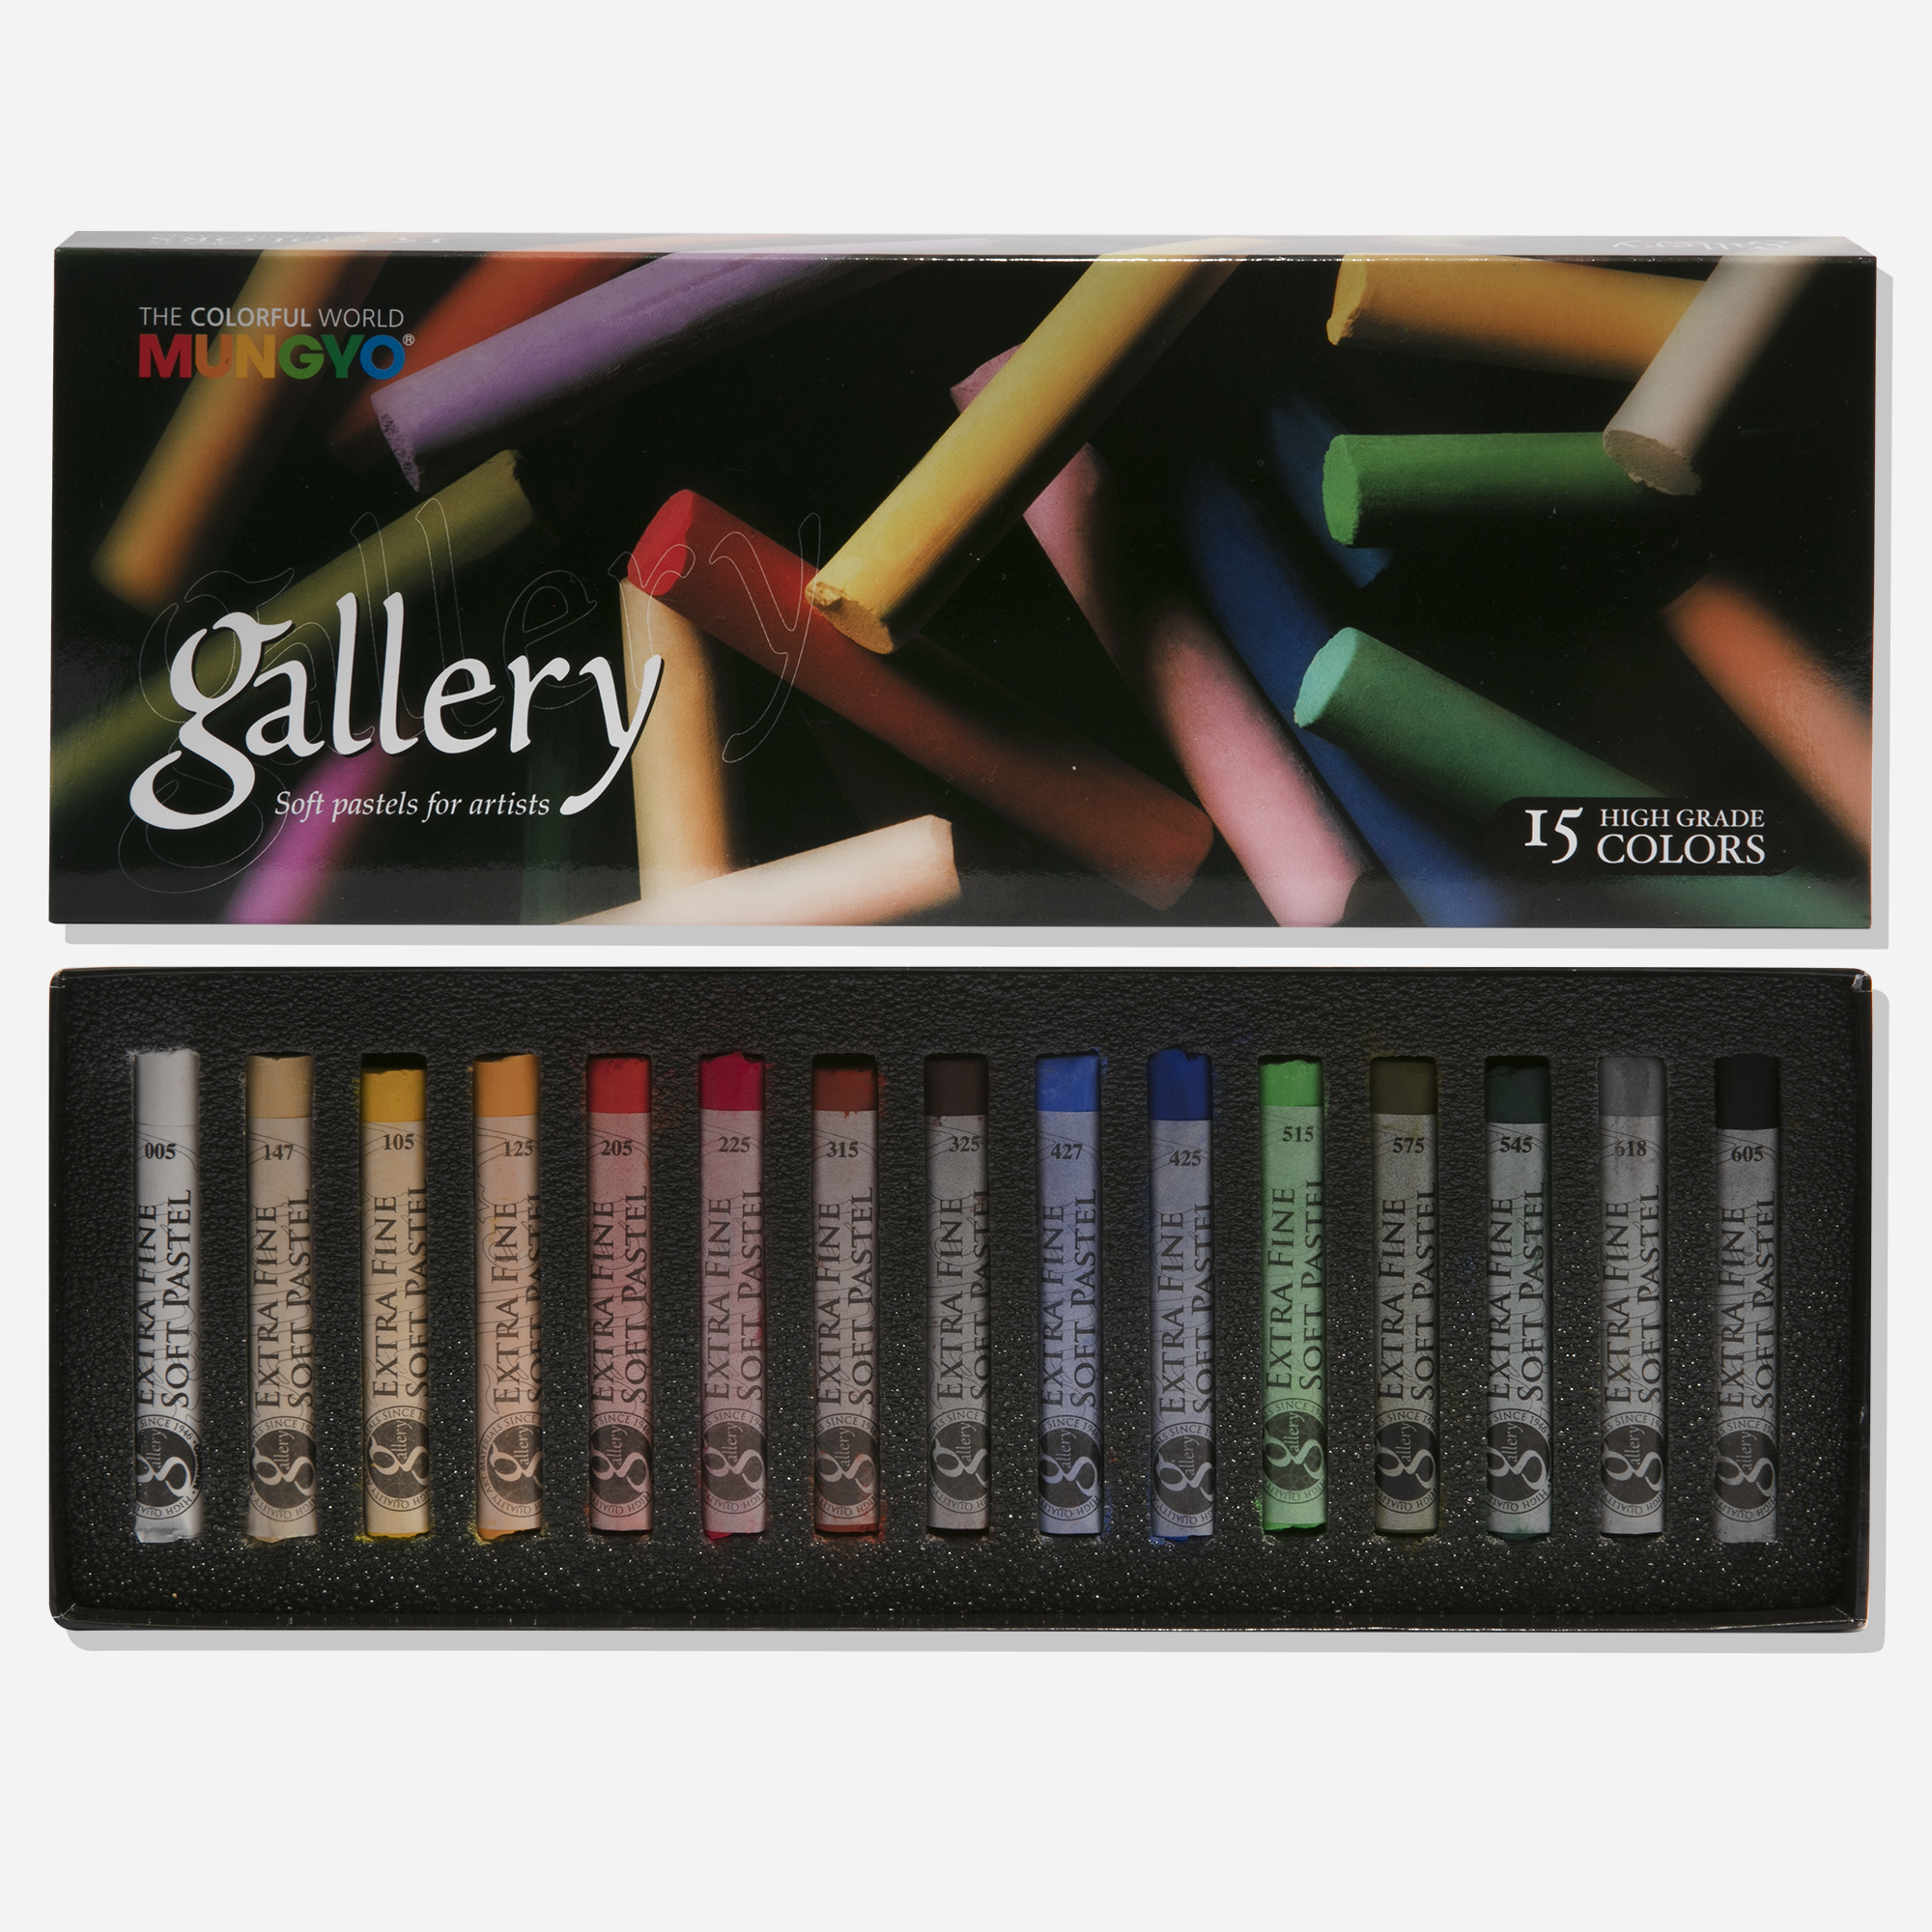 Image of Mungyo Gallery Extra Fine Soft Pastels Set of 15